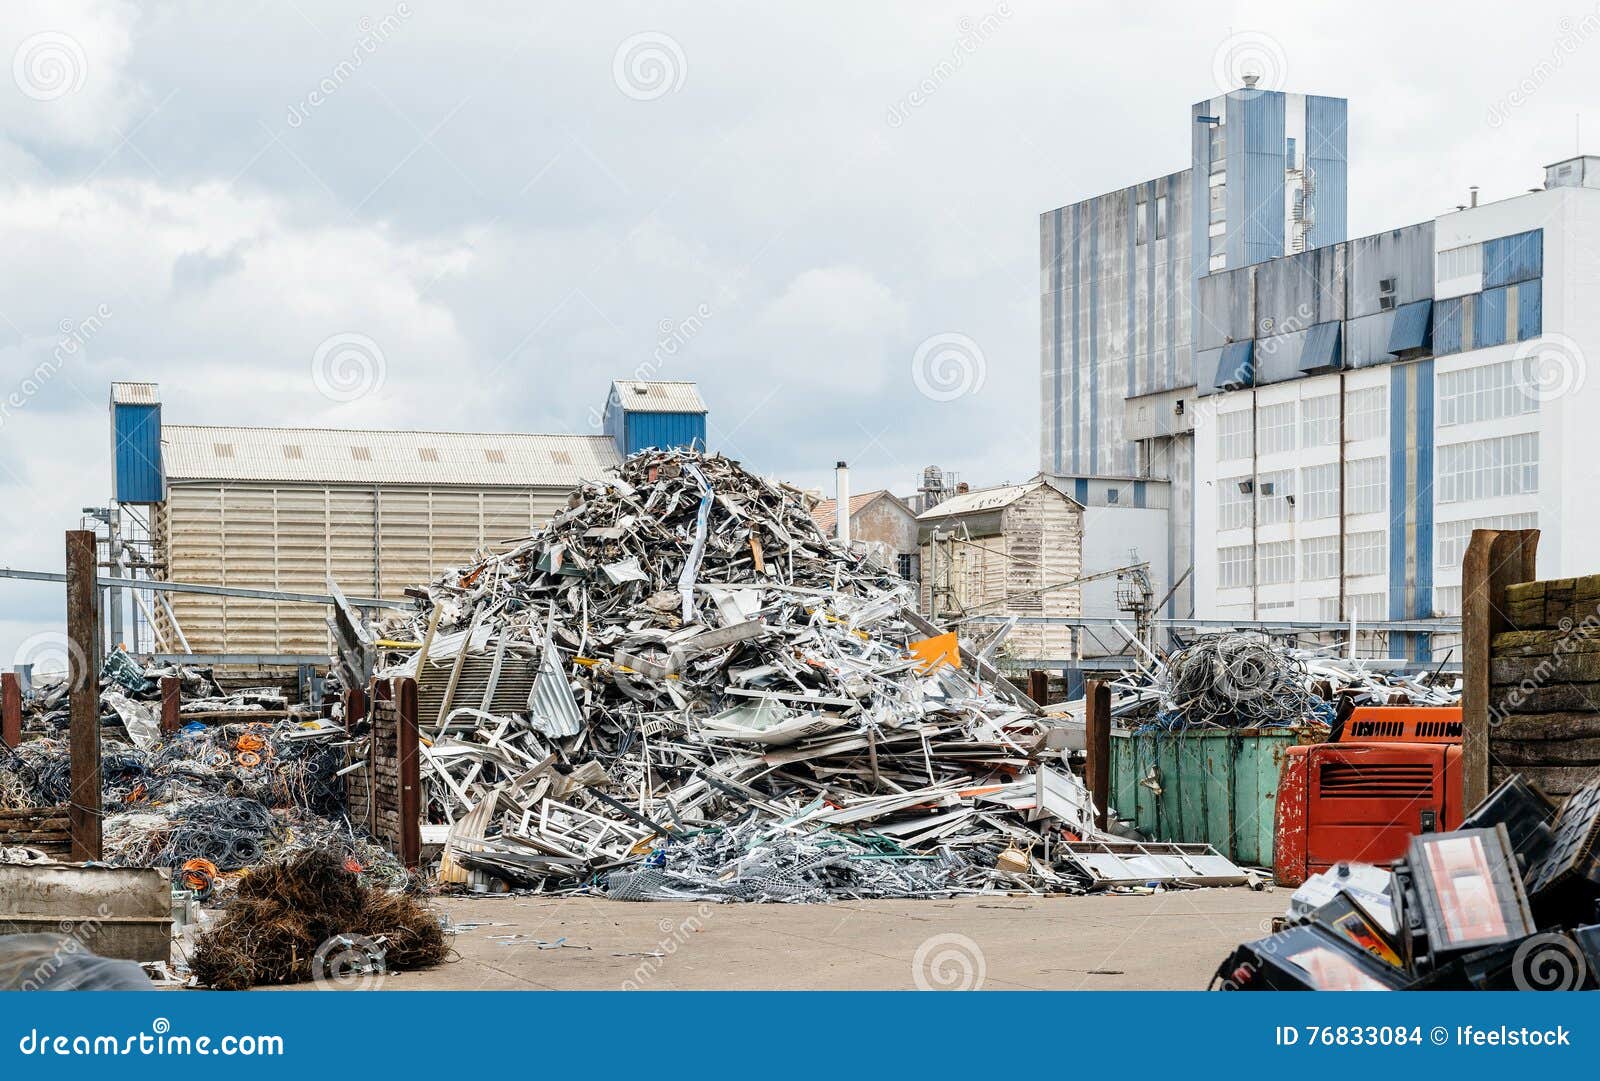 Metallic Waste Management Solution Stock Photo - Image of container ...